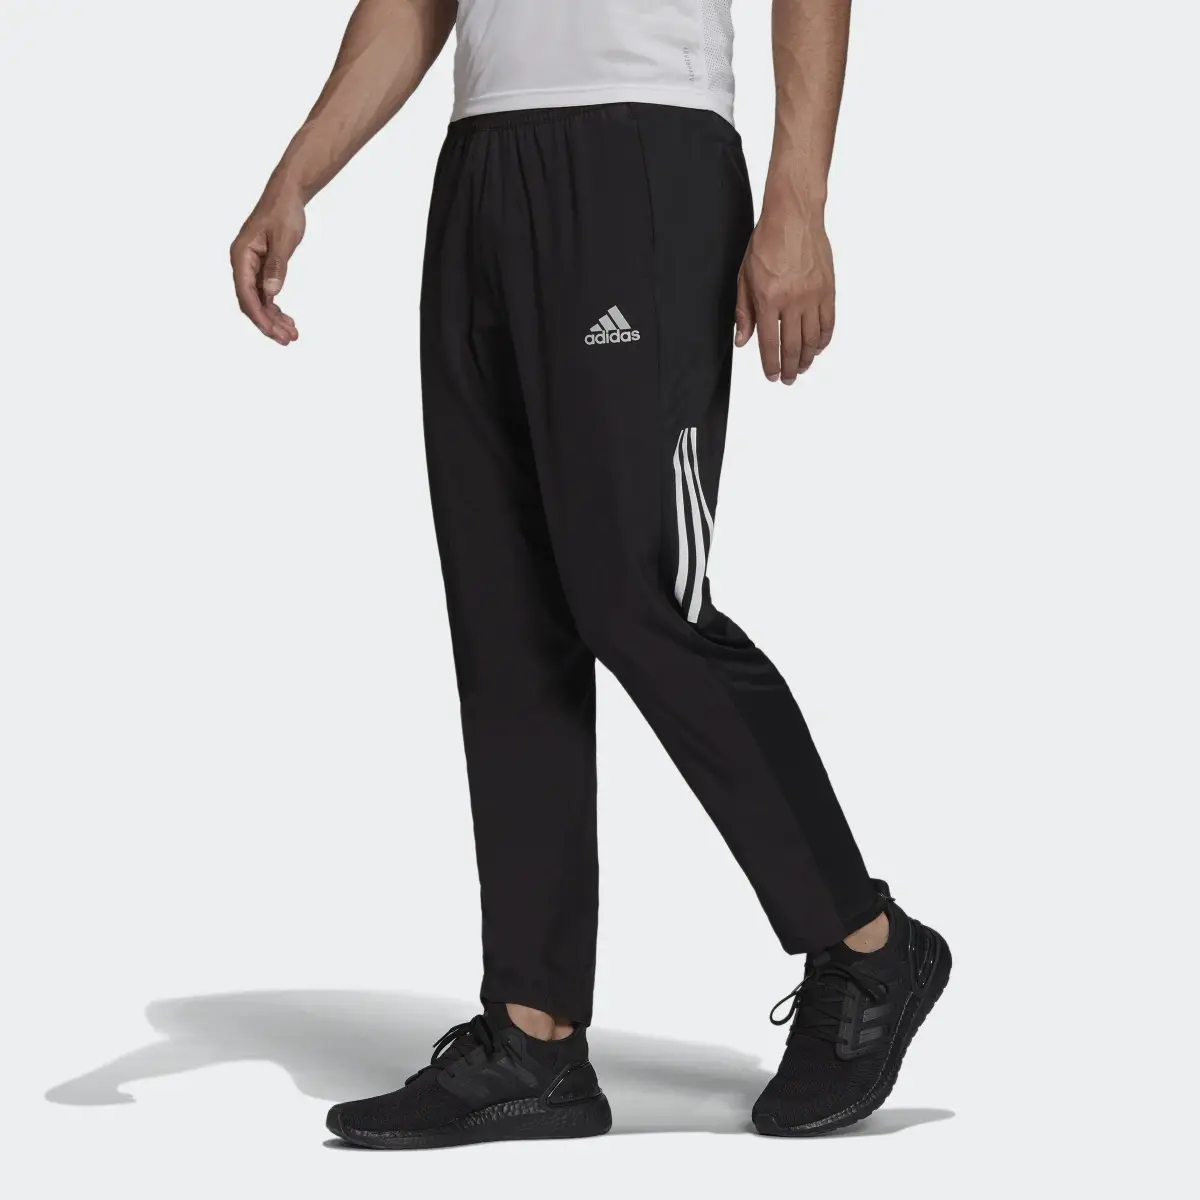 Adidas Own The Run Astro Wind Joggers. 1